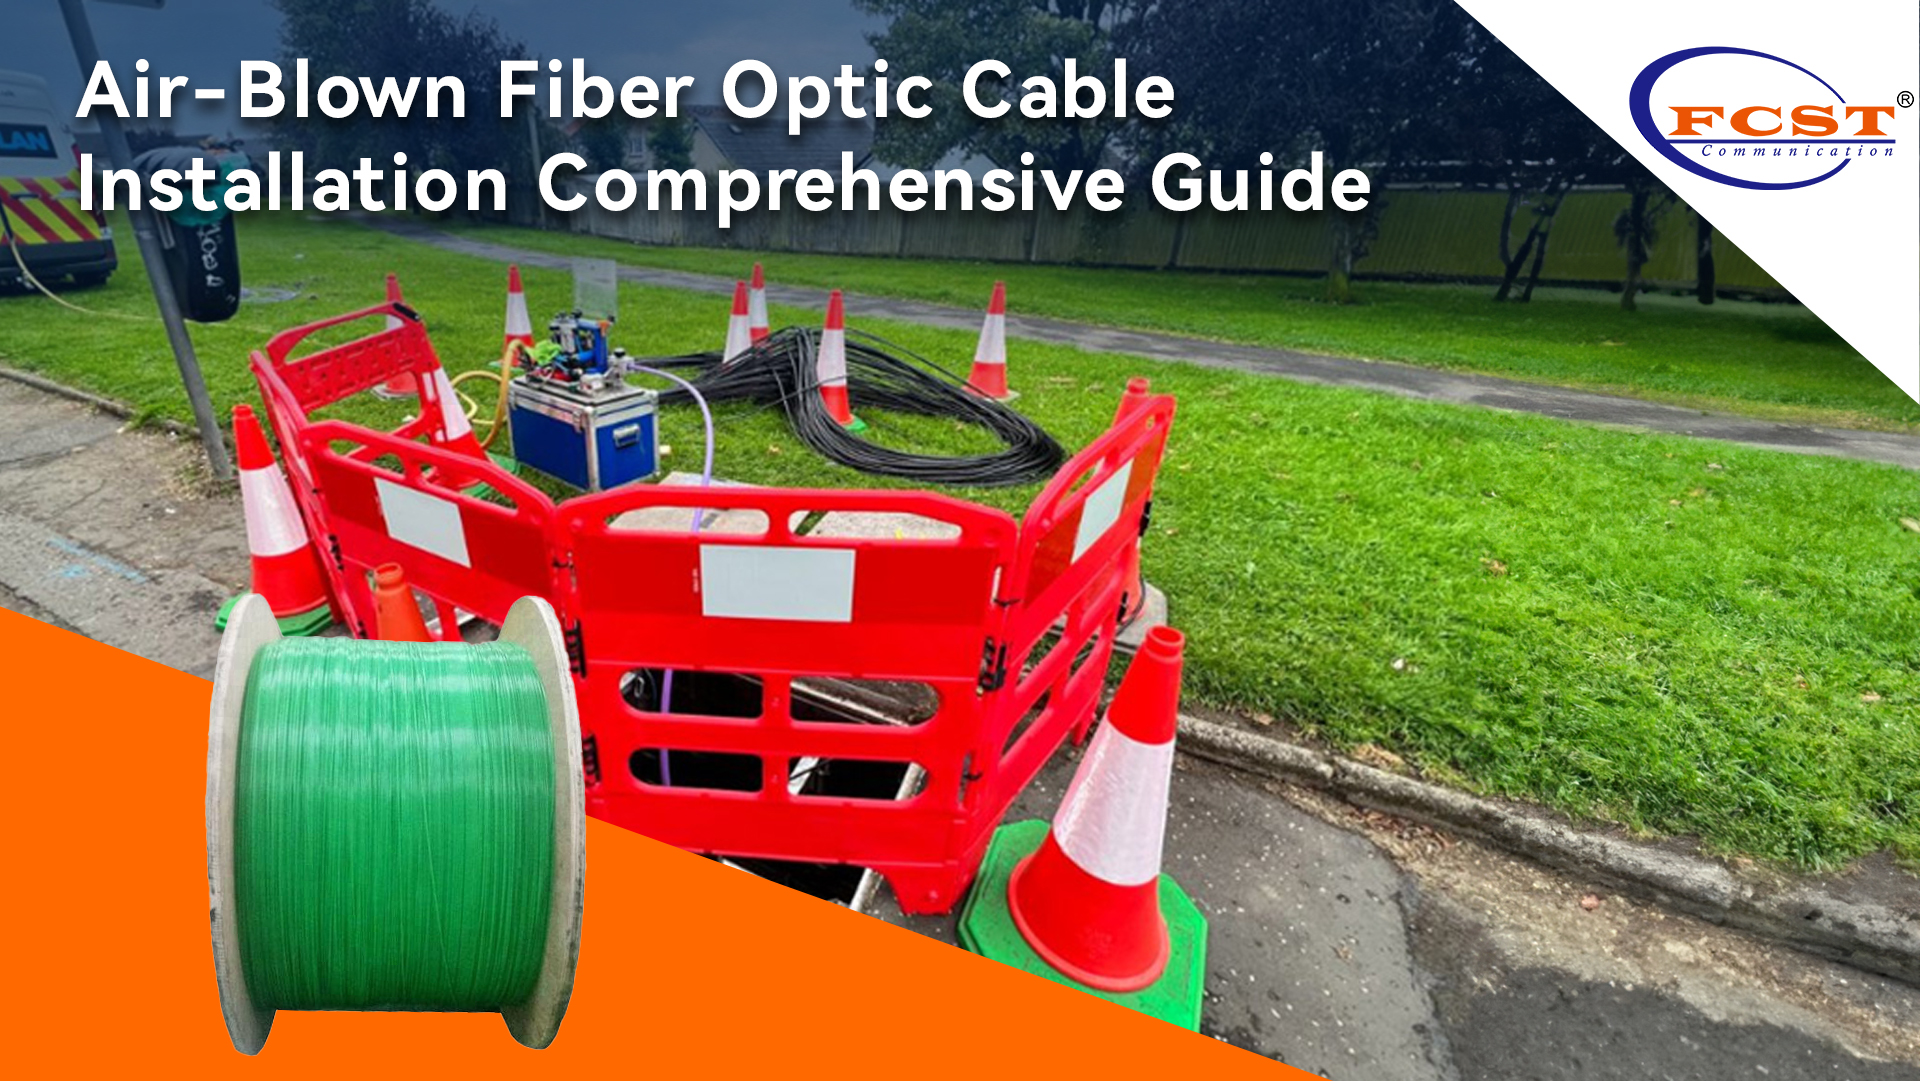 Air-Blown Fiber Optic Cable Installation Comprehensive Guide